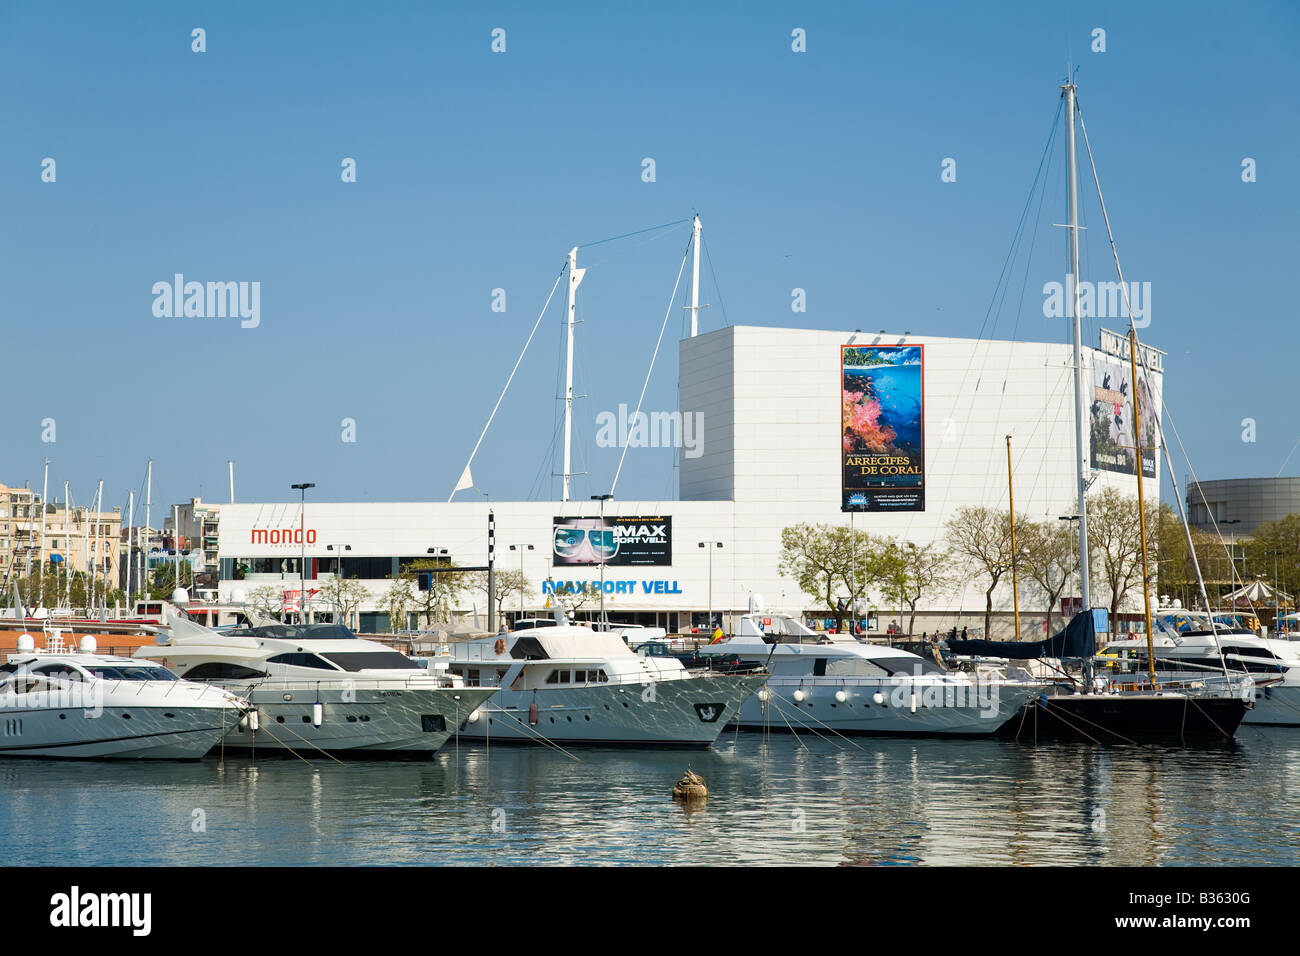 SPAIN Barcelona Sailboats docked in Marina Port Vell Maremagnum retail shopping and aquarium complex along waterfront Stock Photo